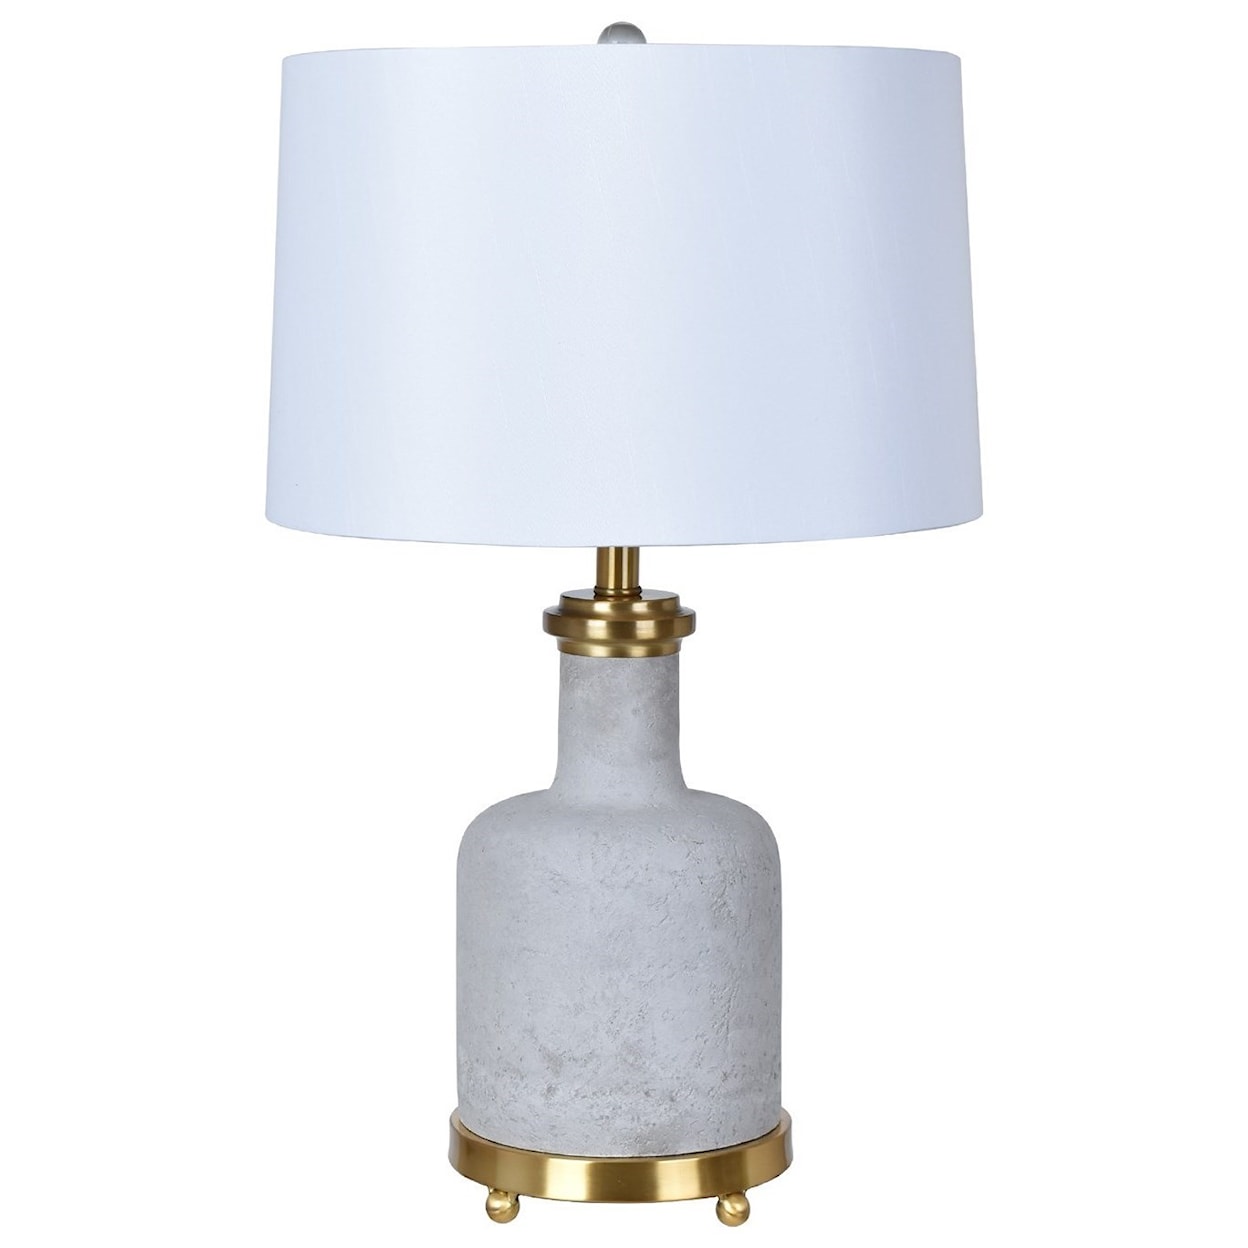 Crestview Collection Lighting Stone Table Lamp